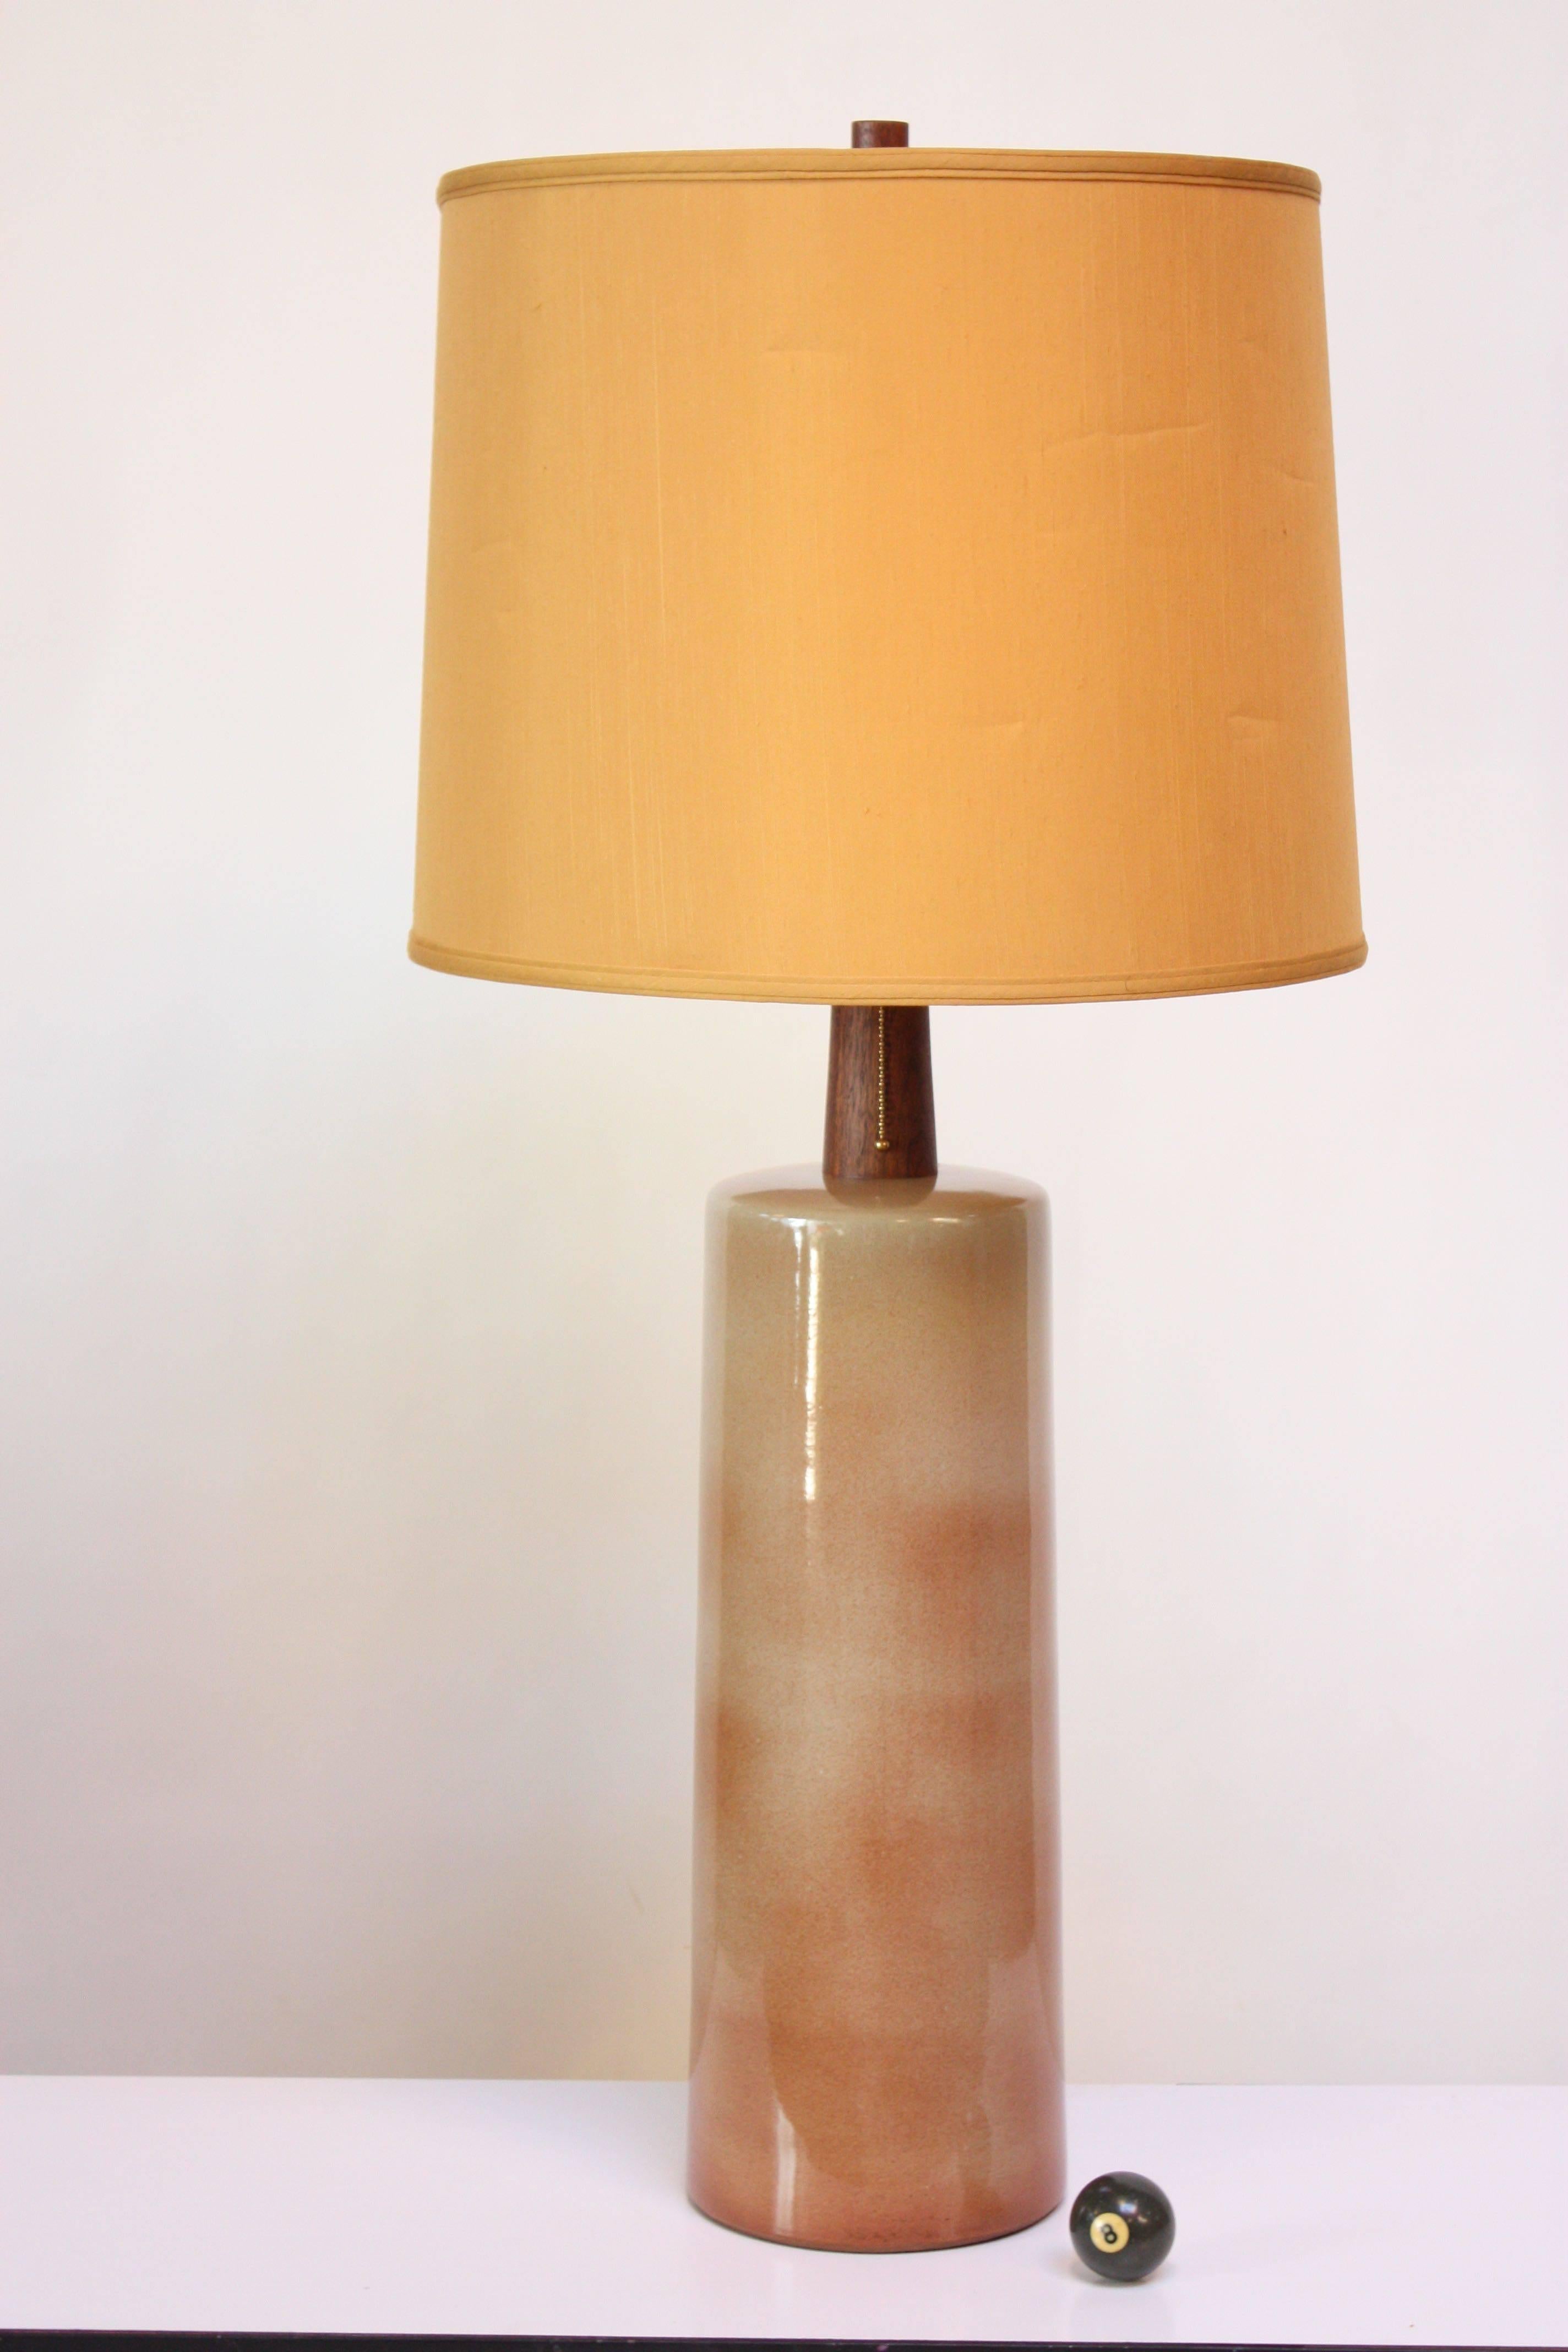 Tall ceramic table lamp (model #191) designed by Gordon and Jane Martz for Marshall Studios in the 1960s. Brush decorated with a high-gloss glaze in light beige and dusty pink. Vivid grain and rich color to both walnut finial and stem.
Impressive